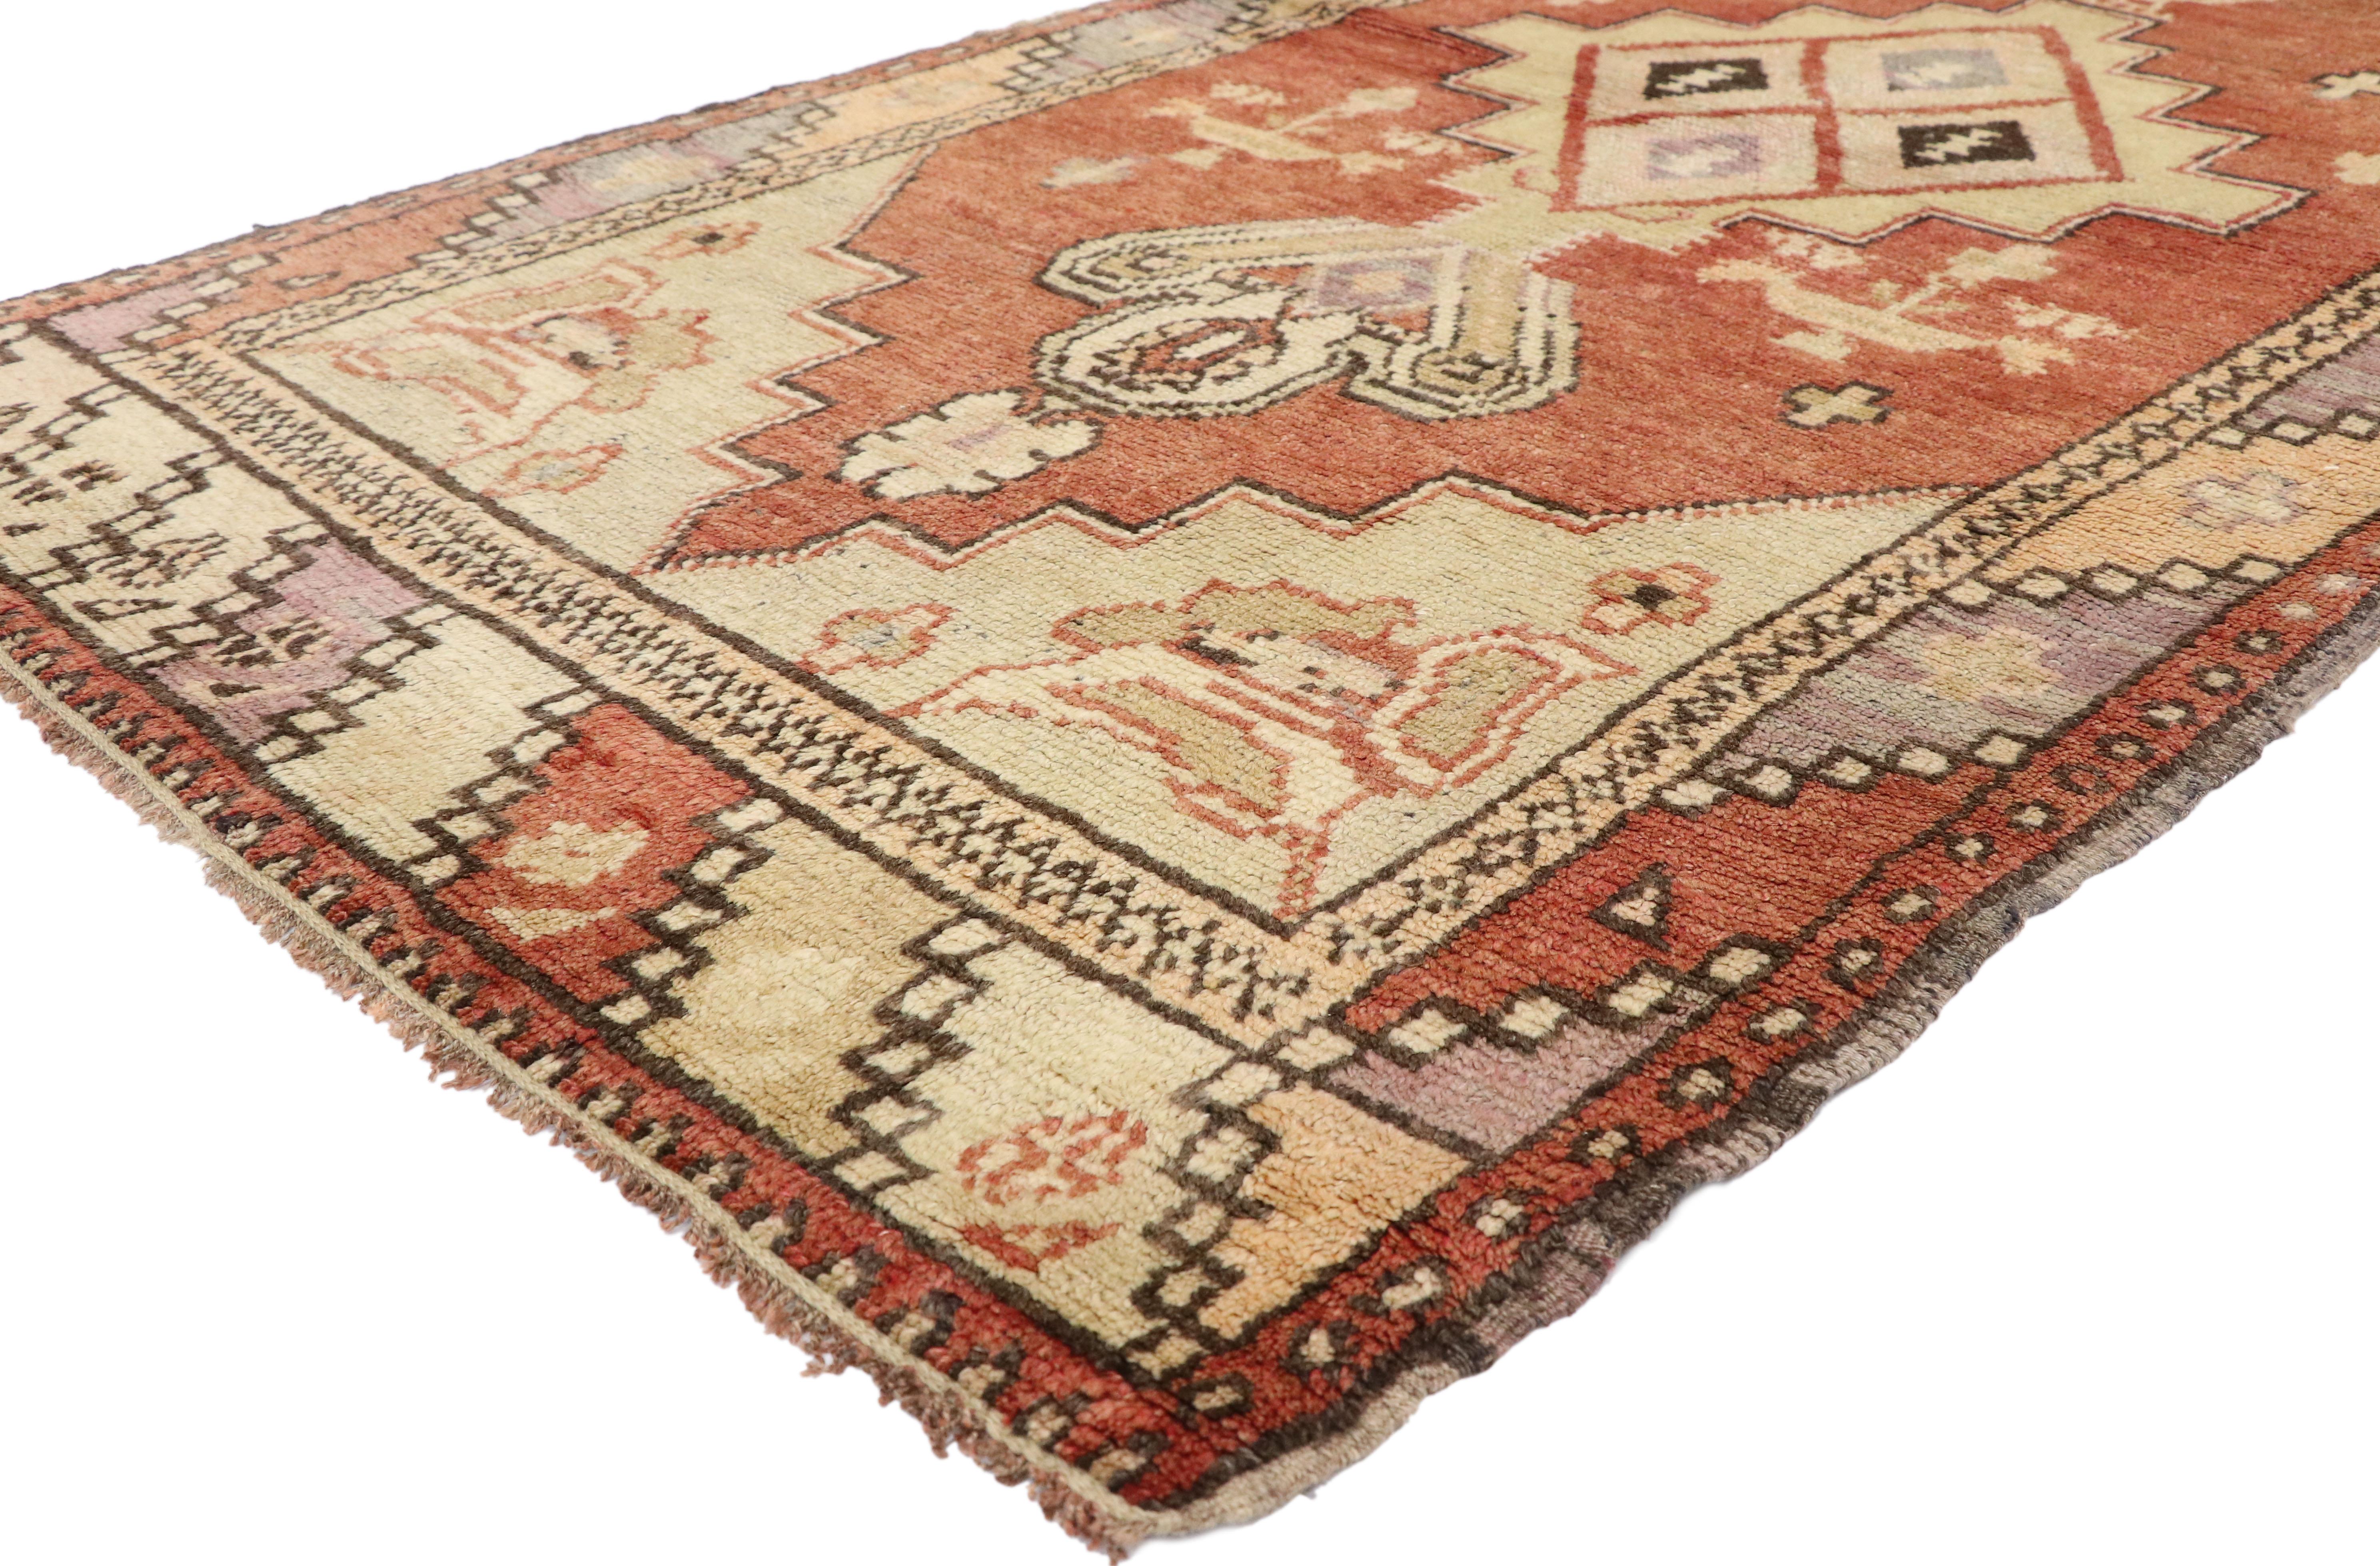 50173, vintage Turkish Oushak accent rug, entry or foyer rug 03'04 x 06'08. This hand knotted wool distressed vintage Turkish Oushak Yastik scatter rug features a central stepped medallion patterned with a geometric botanical scene dotted with